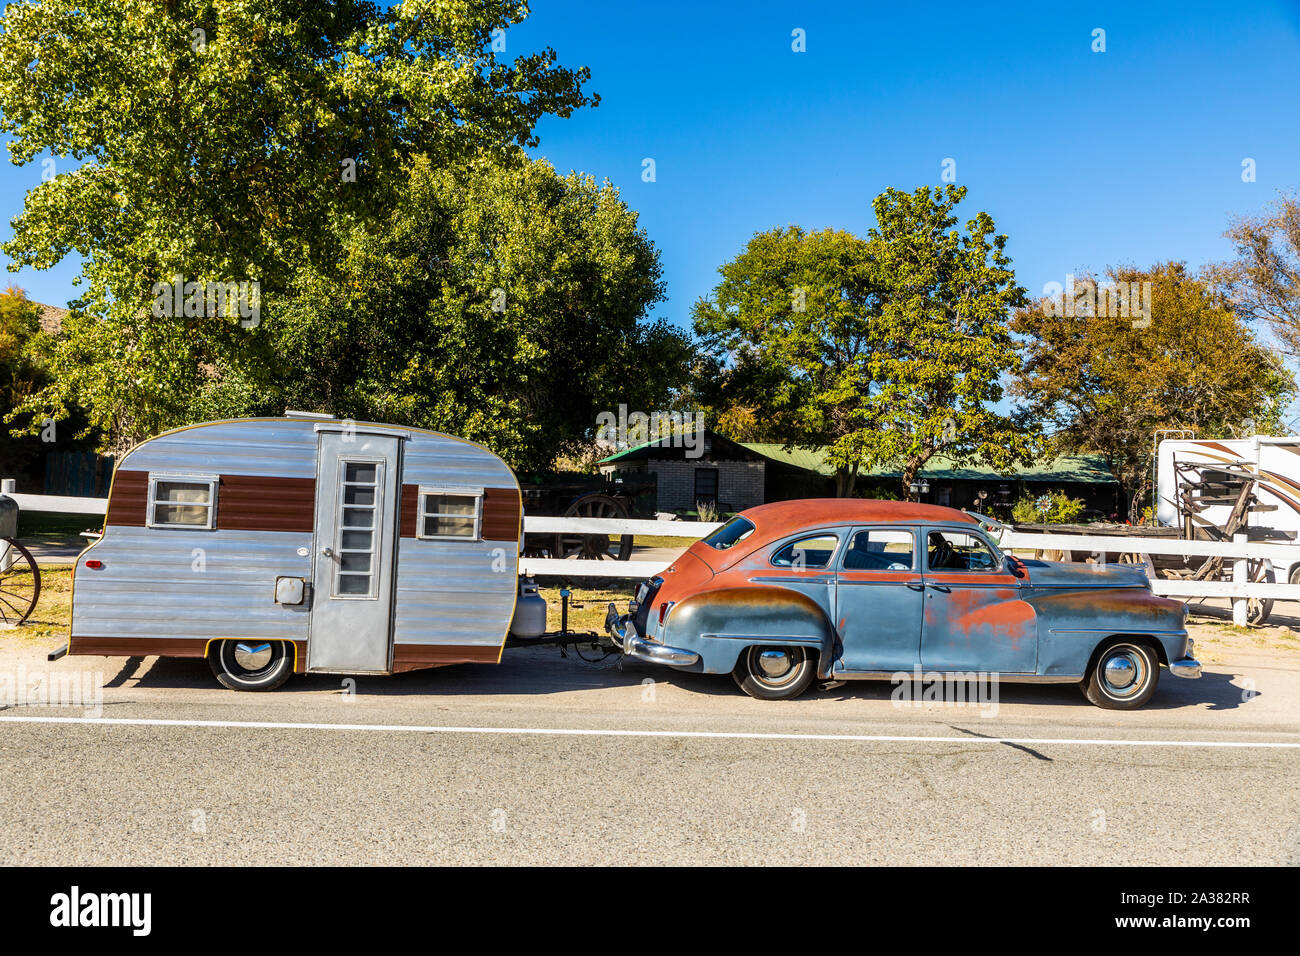 A 1946 DeSoto car and a vintage travel trailer in Benton Hot Springs in remote eastern California Stock Photo